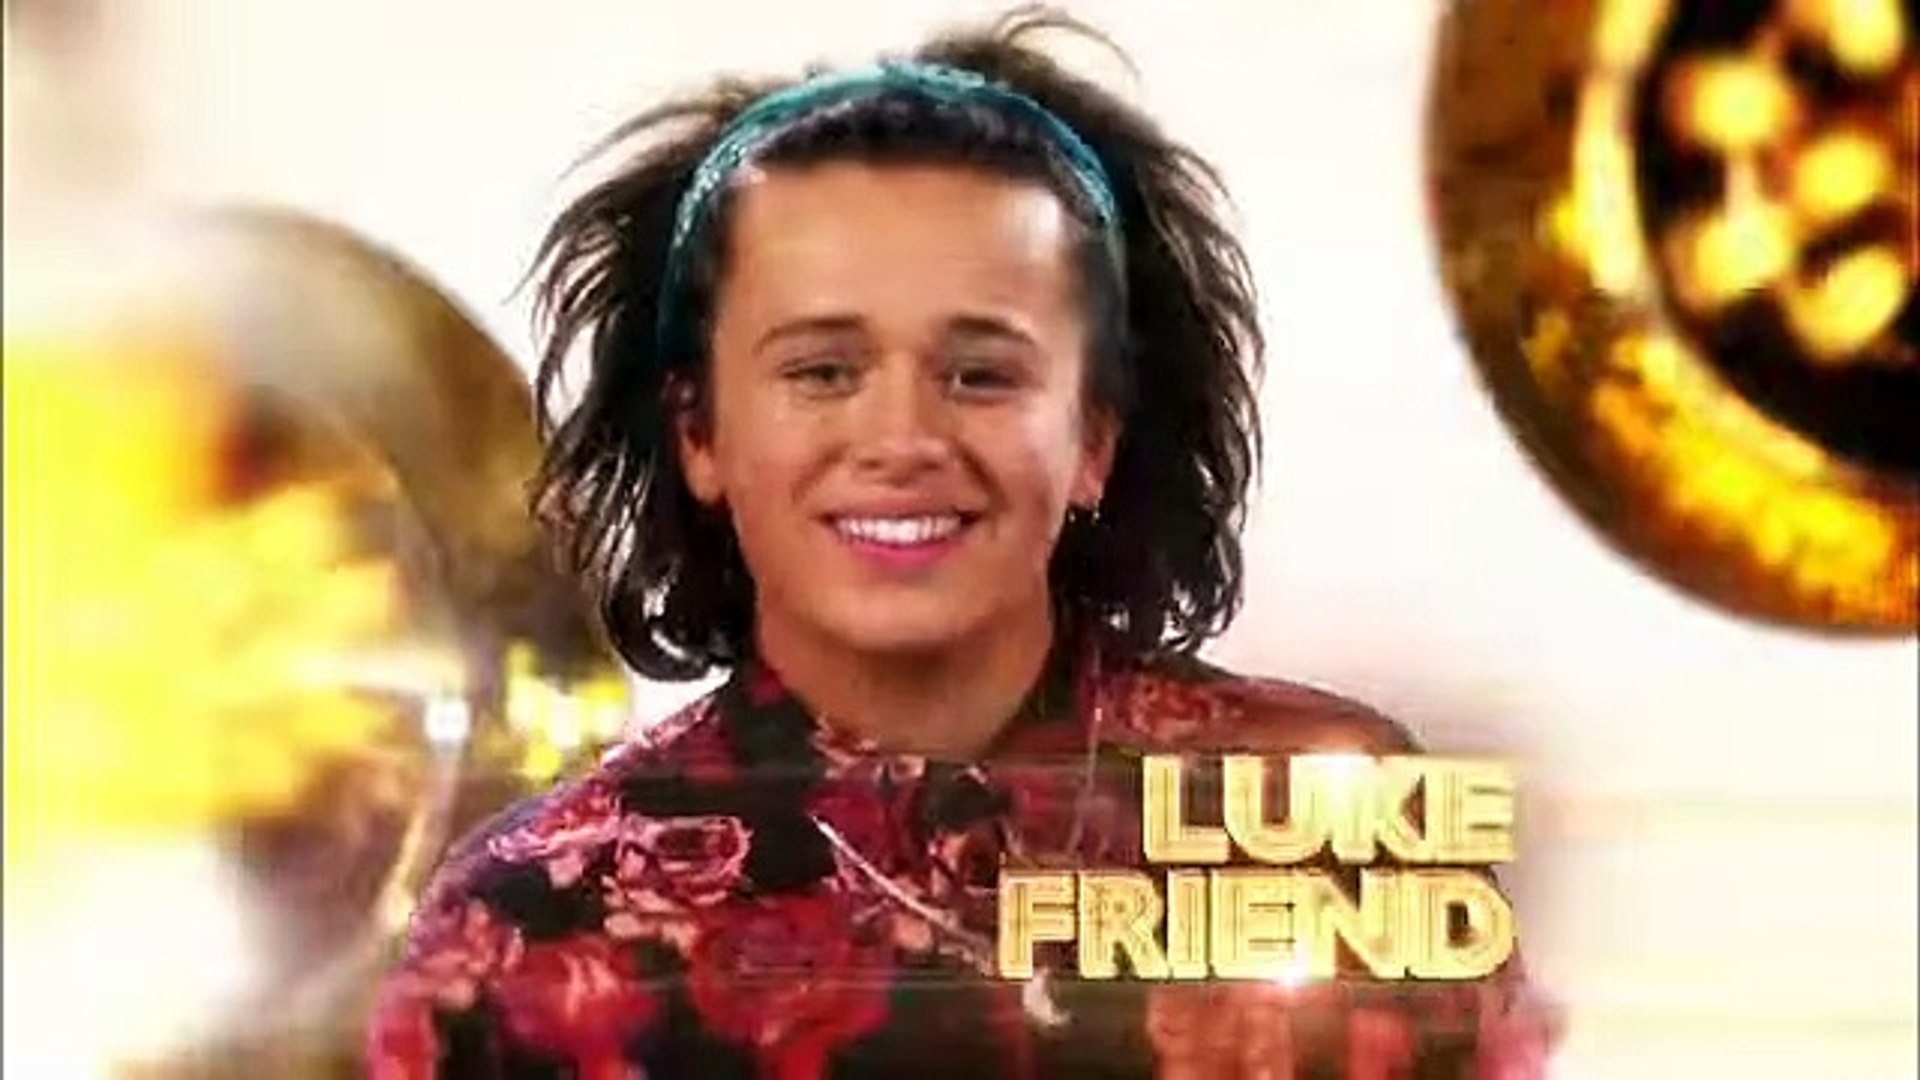 ⁣Luke Friend sings Every Breath You Take by The Police - Live Week 1 - The X Factor 2013 - Official C